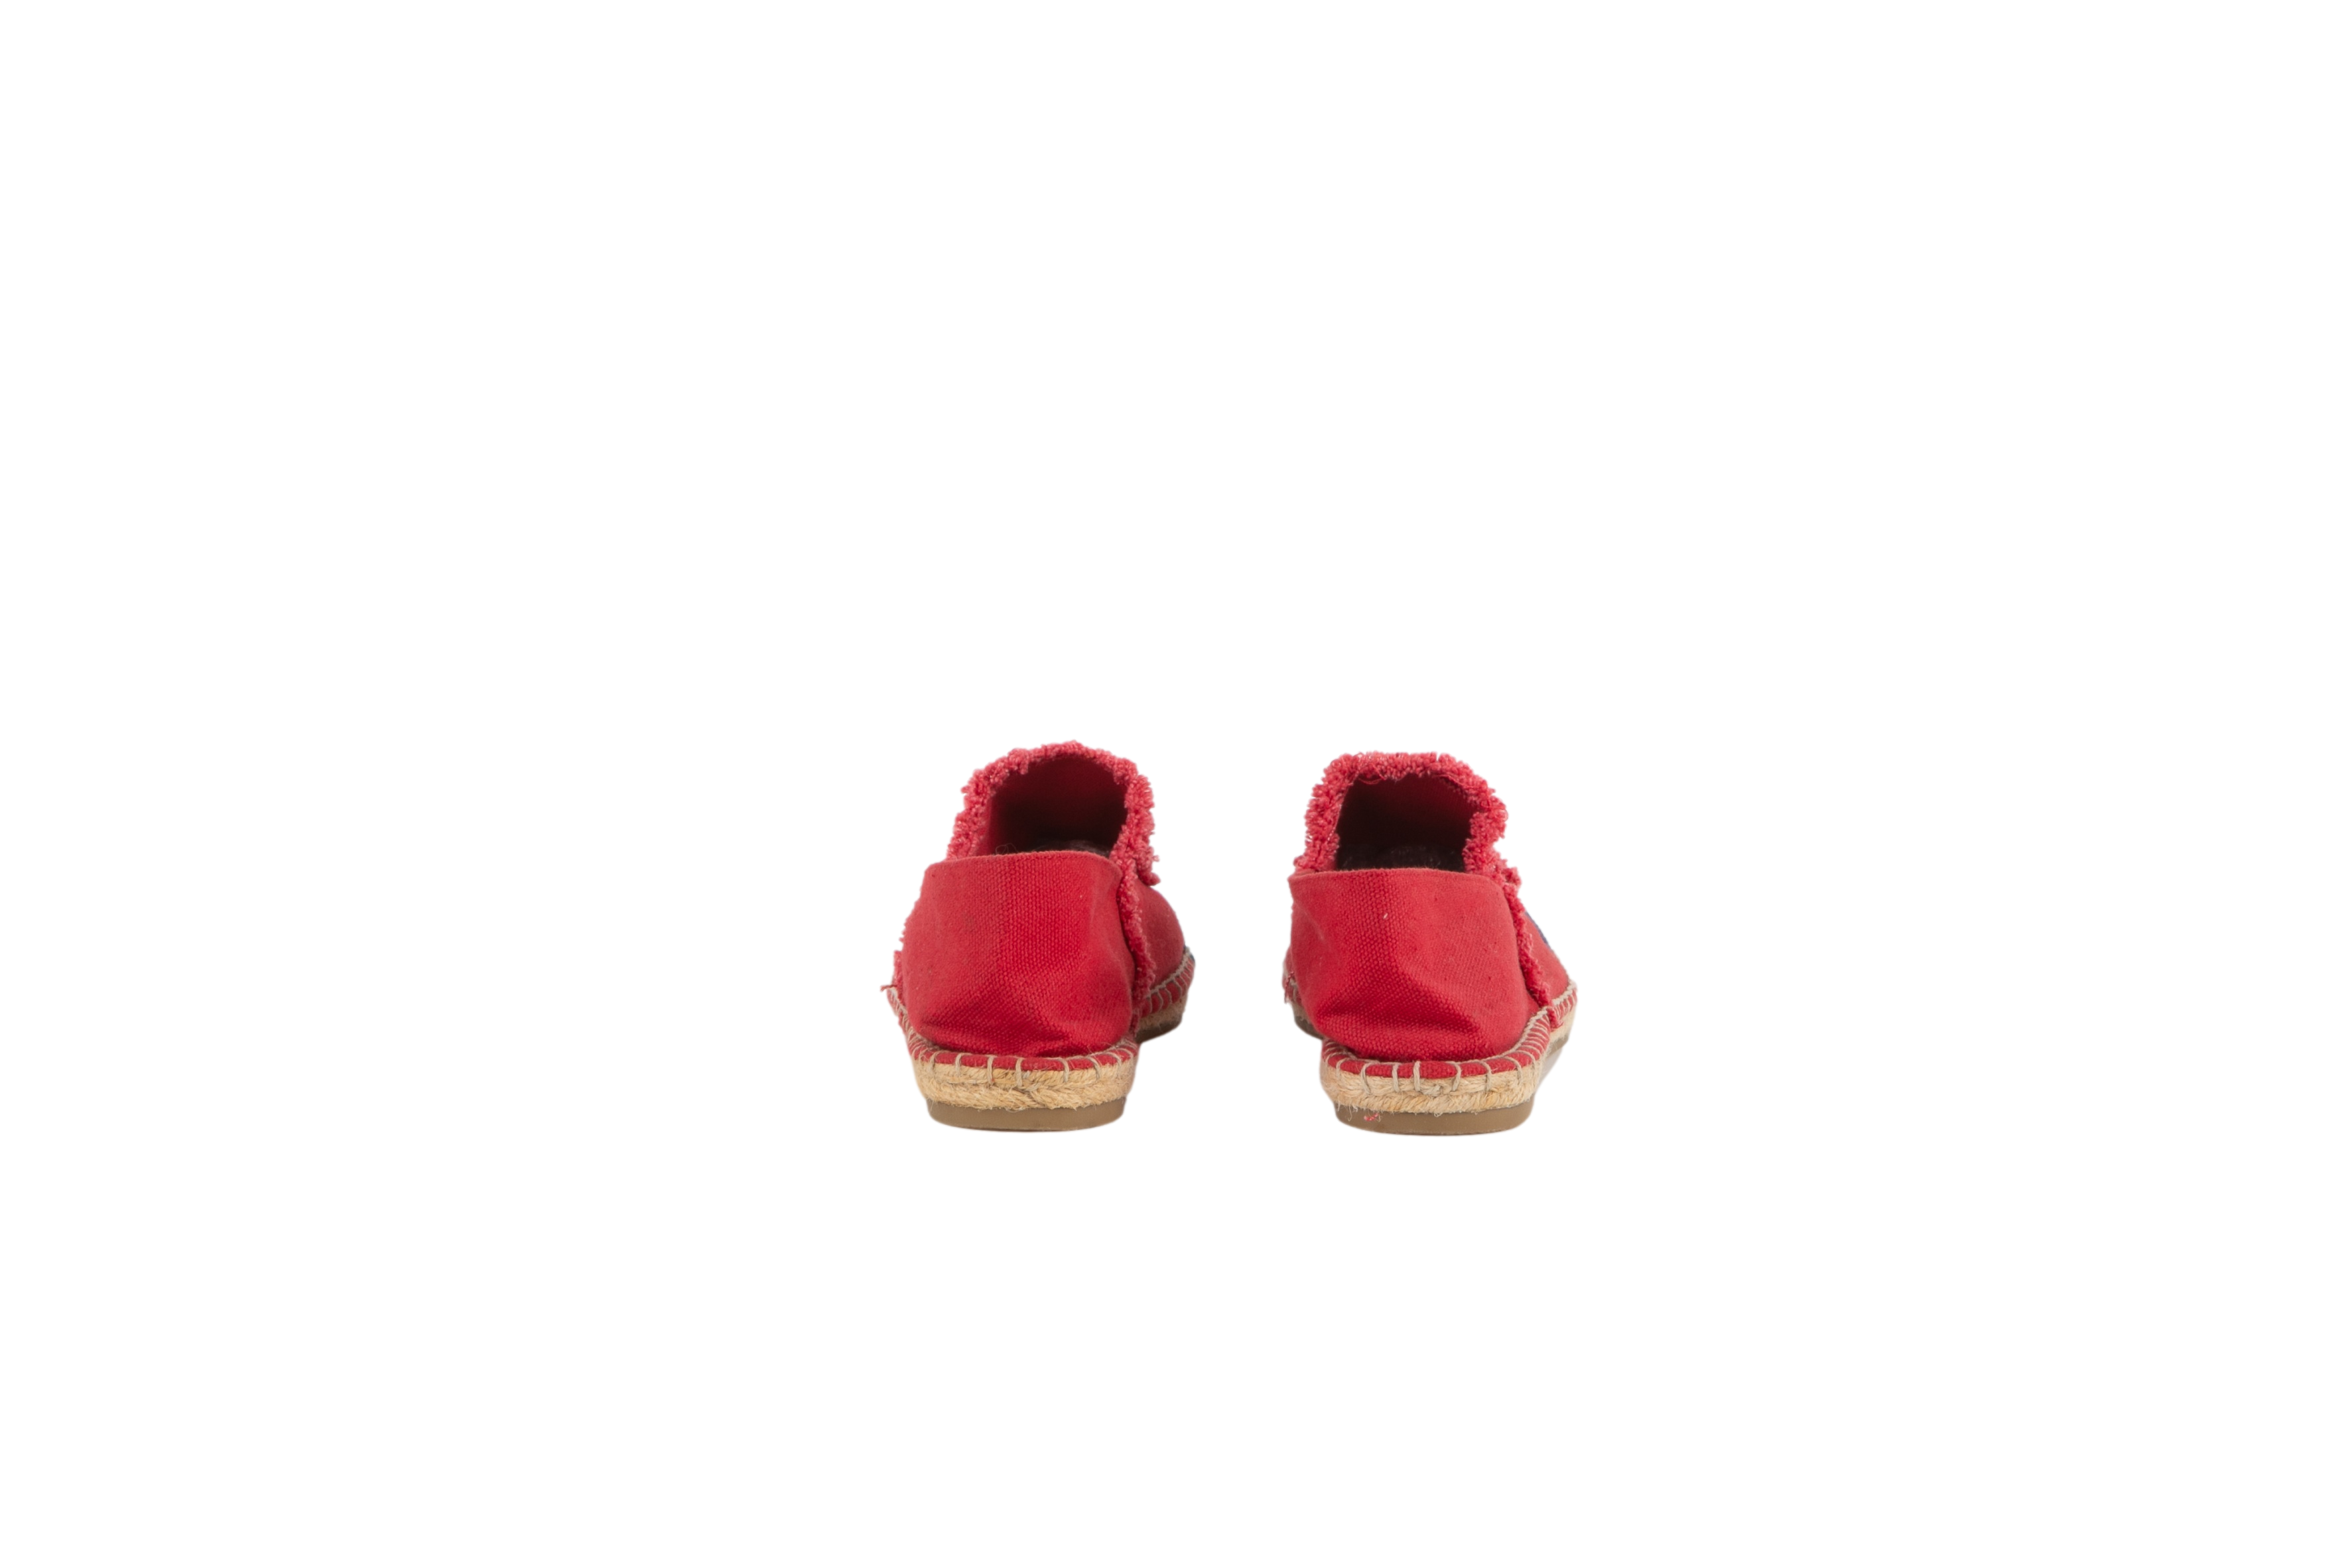 CHANEL ESPADRILLE RED